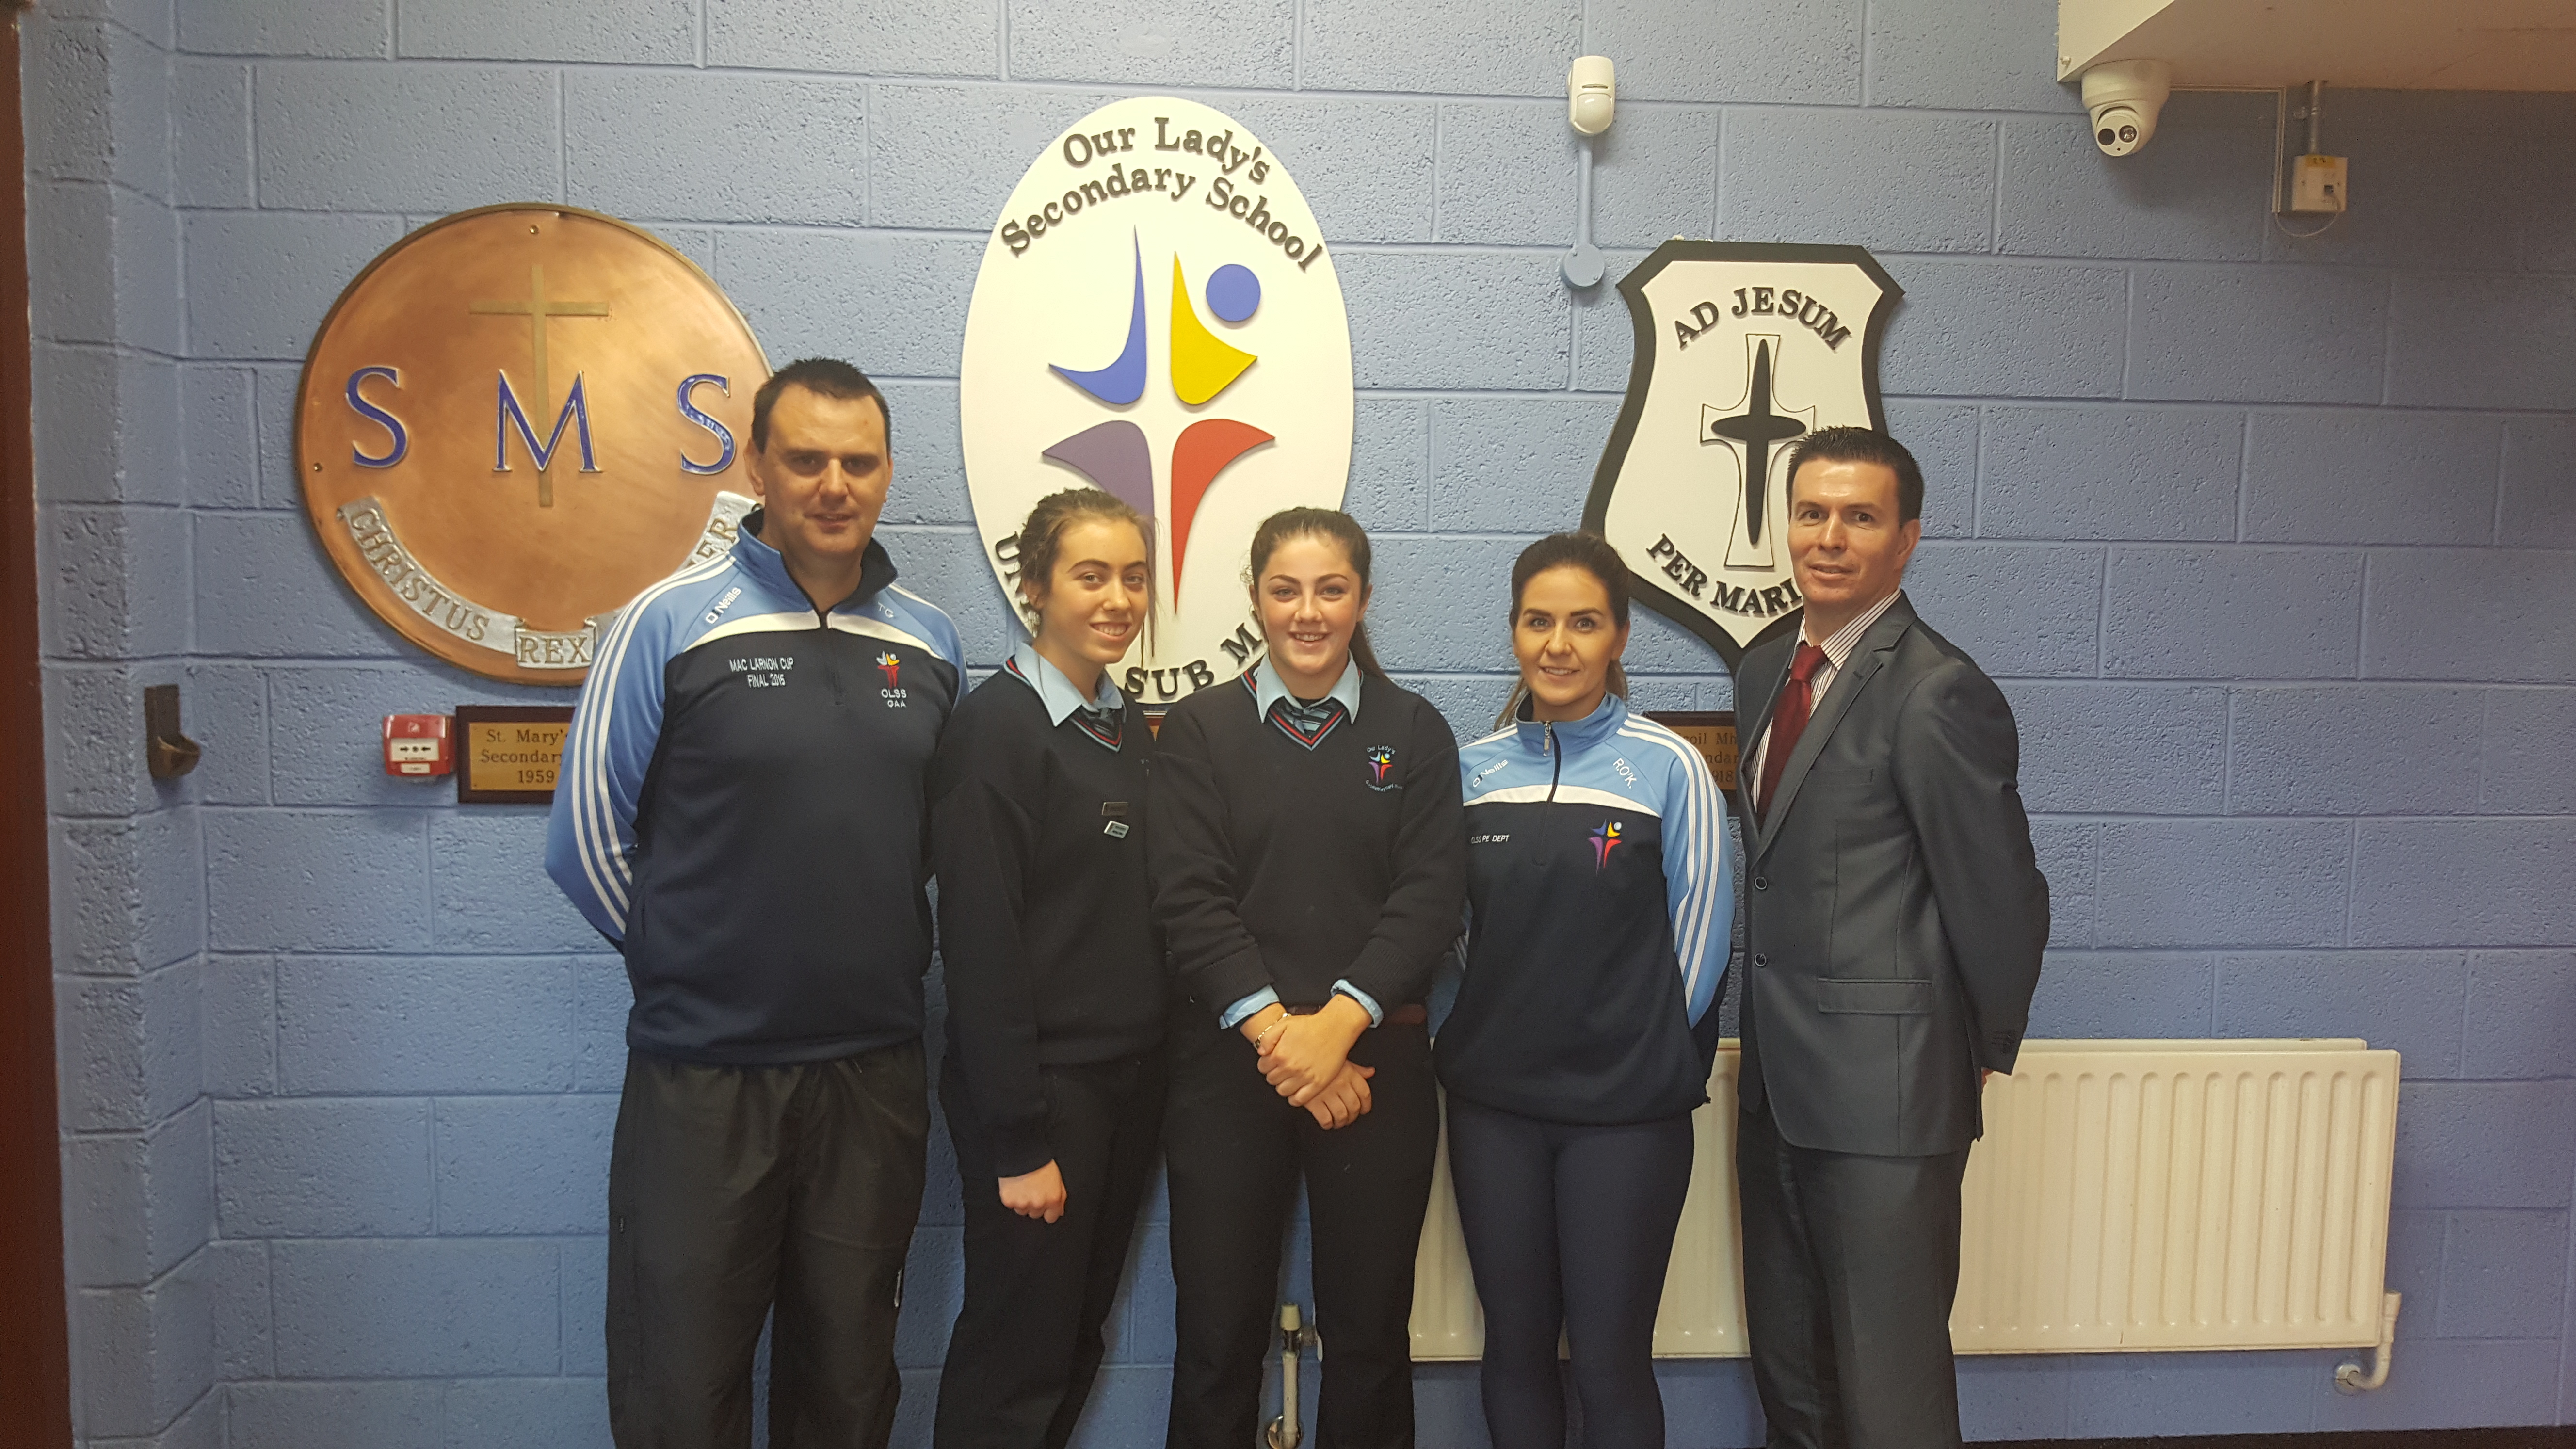 More All STAR success for Our Ladys Secondary School Castleblayney